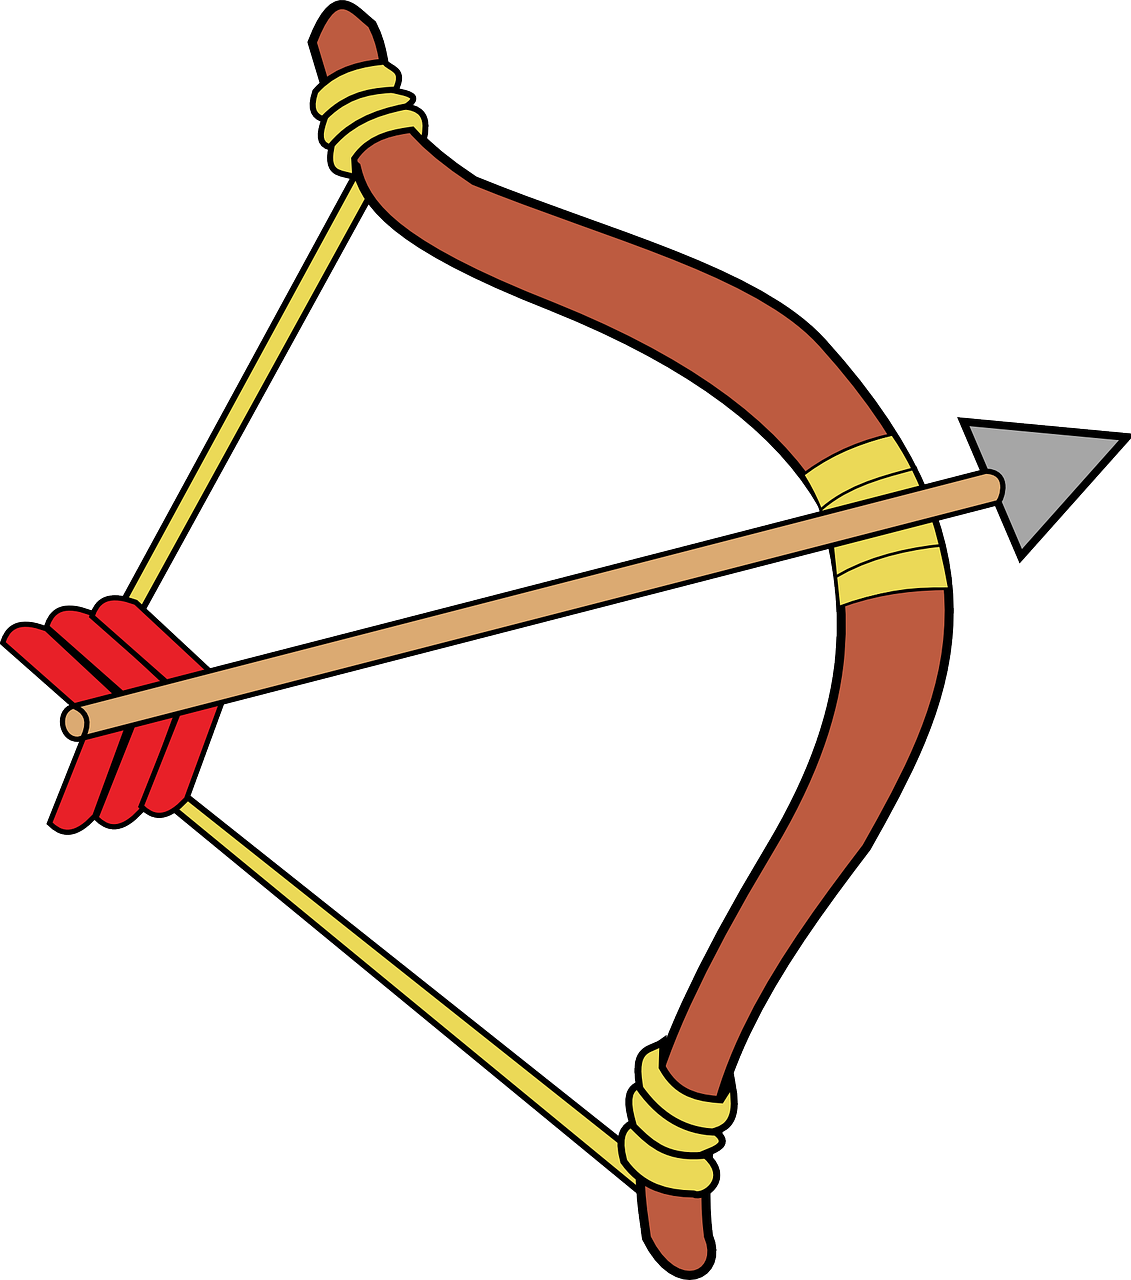 Bow Arrow PNG Image HD